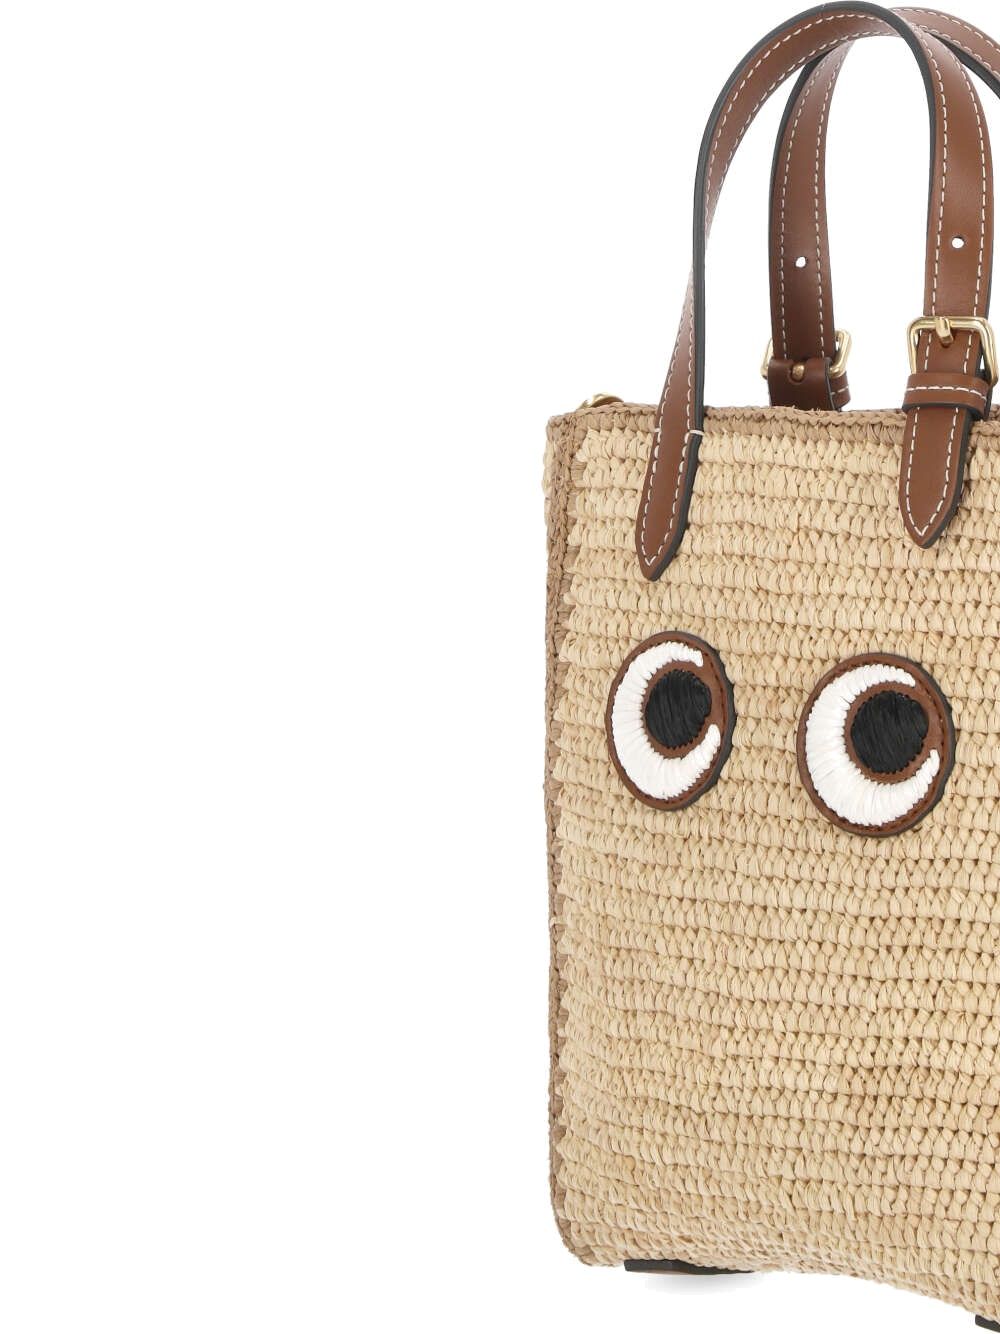 bag with eyes embroidered on the front